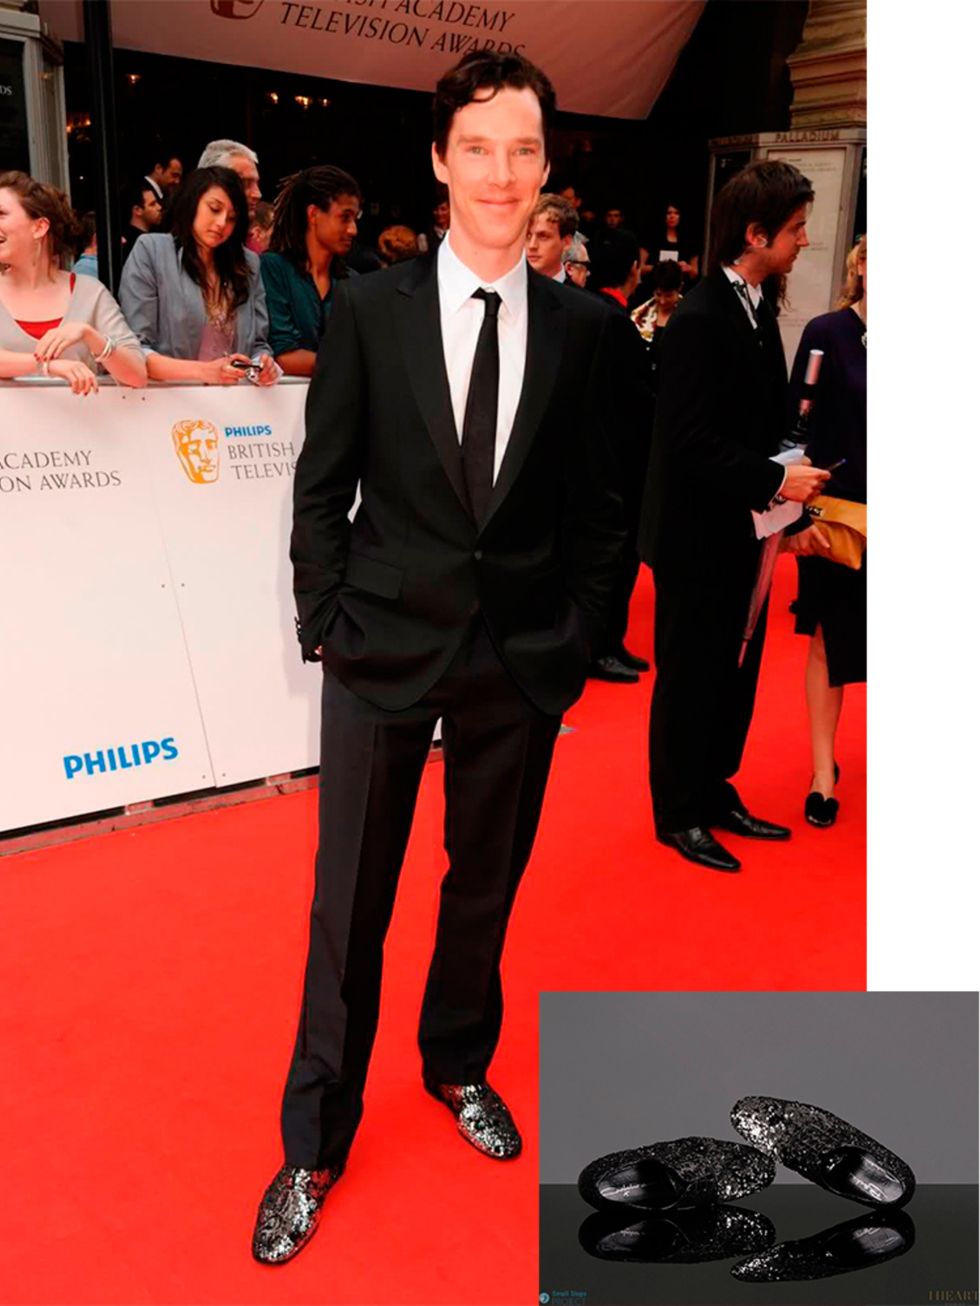 <p><a href="http://www.smallstepsproject.org/portfolio/benedict-cumberbatch/">Benedict Cumberbatch</a> and his signed shoes.</p>